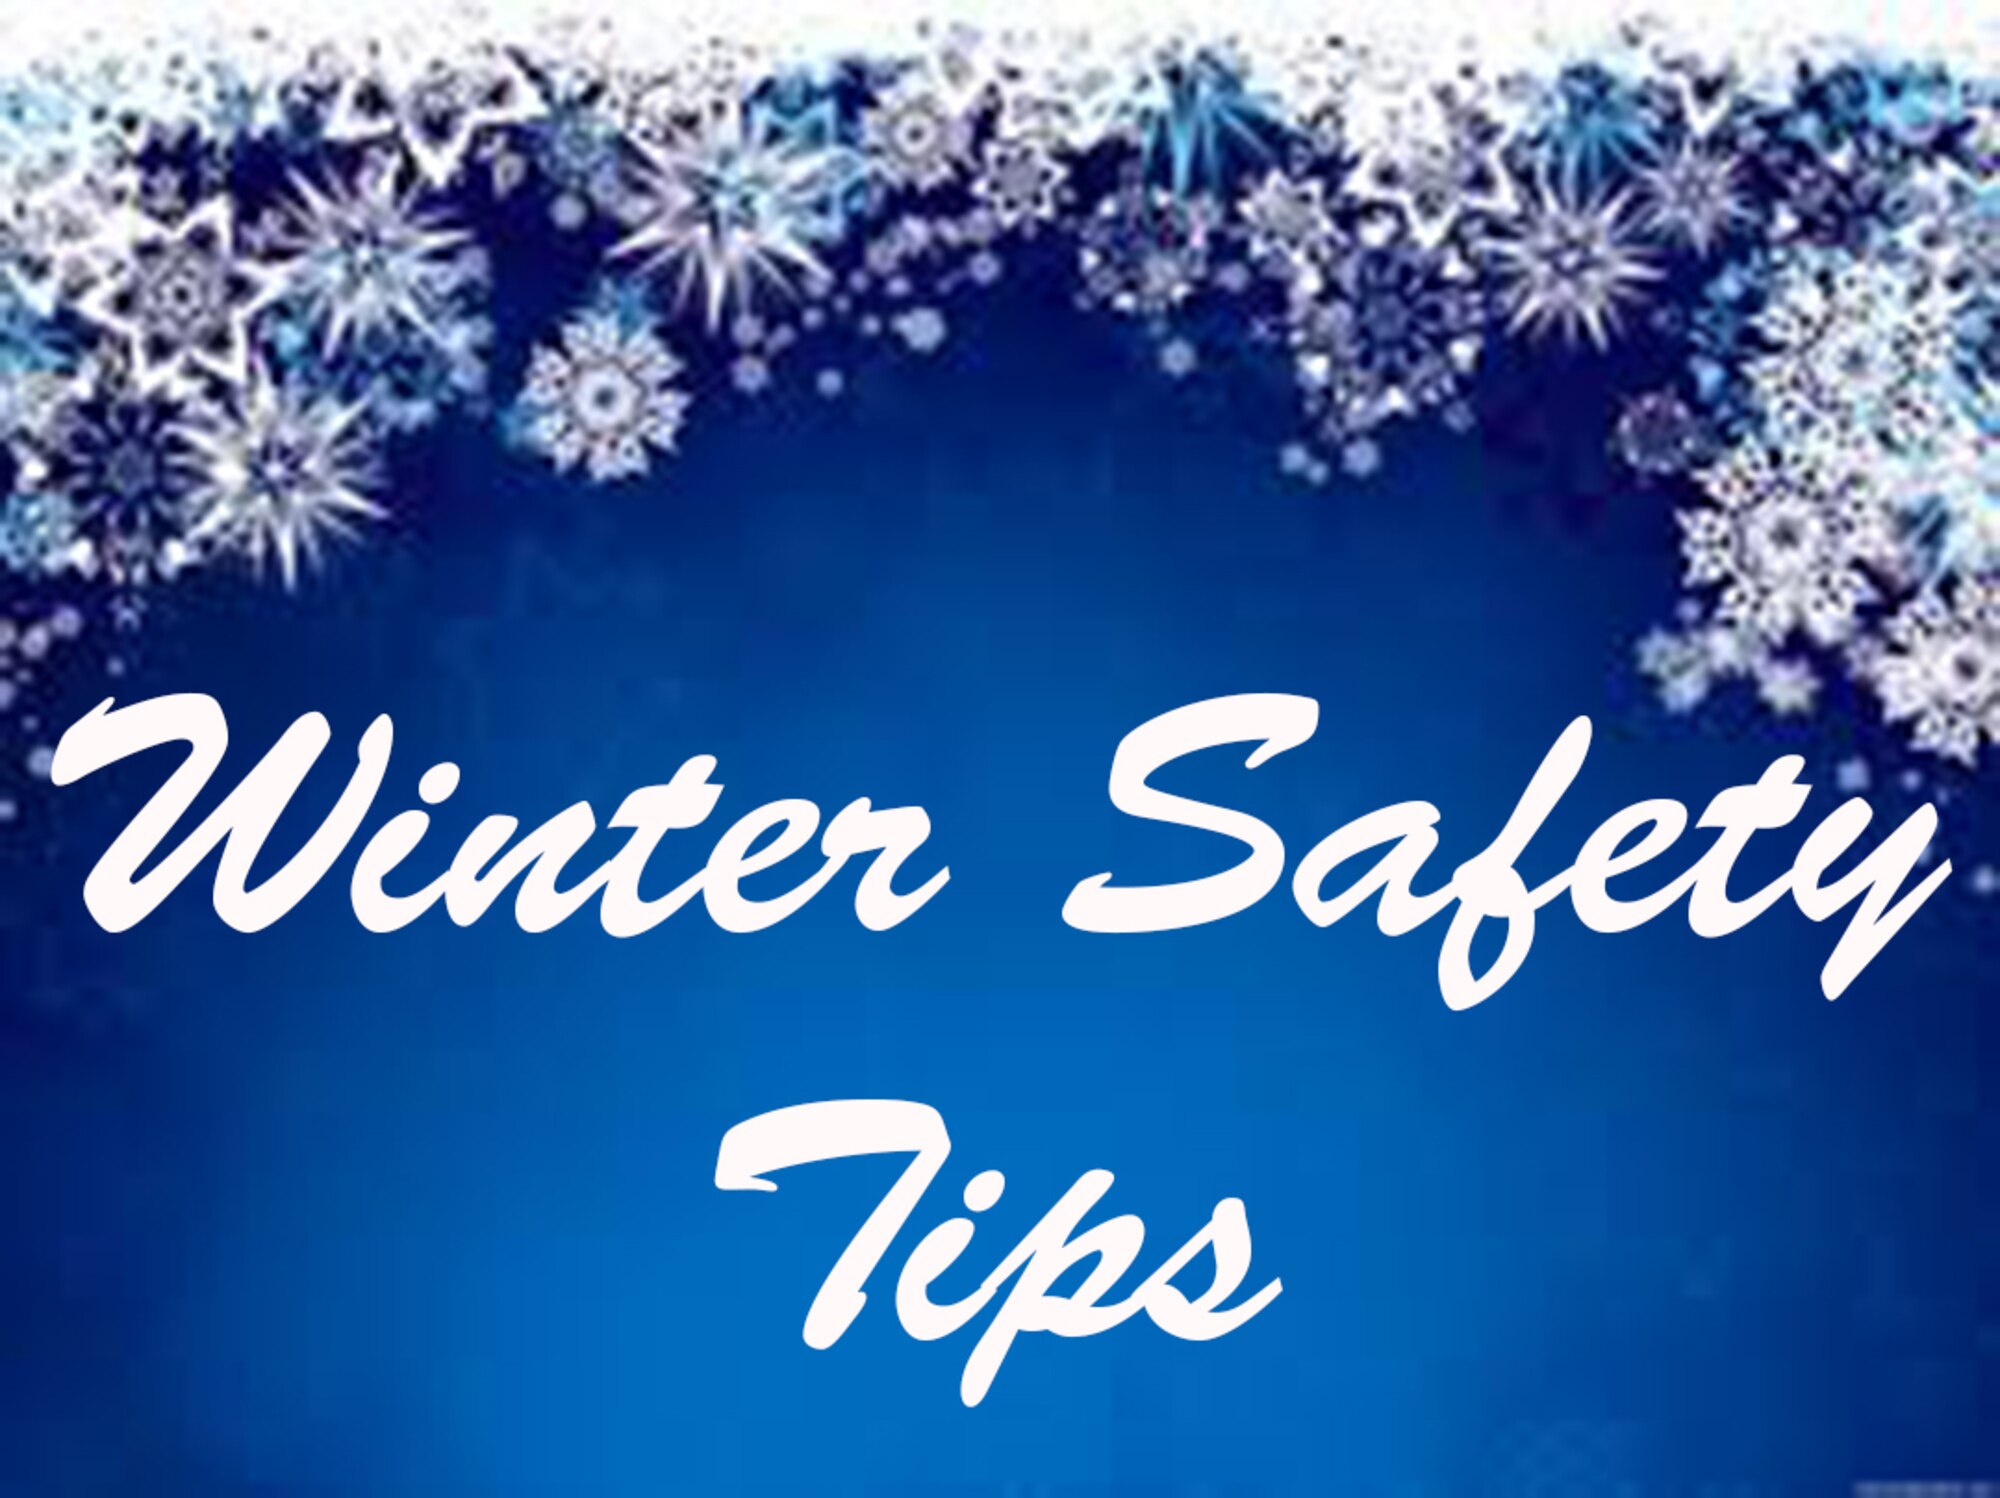 The winter holidays bring family fun, festivities, and traditions, but also brings extra safety precautions to take into consideration. Visit the Centers for Disease Control’s Winter Weather website for more information on winter safety tips https://www.cdc.gov/disasters/winter/index.html. (Courtesy Photo)